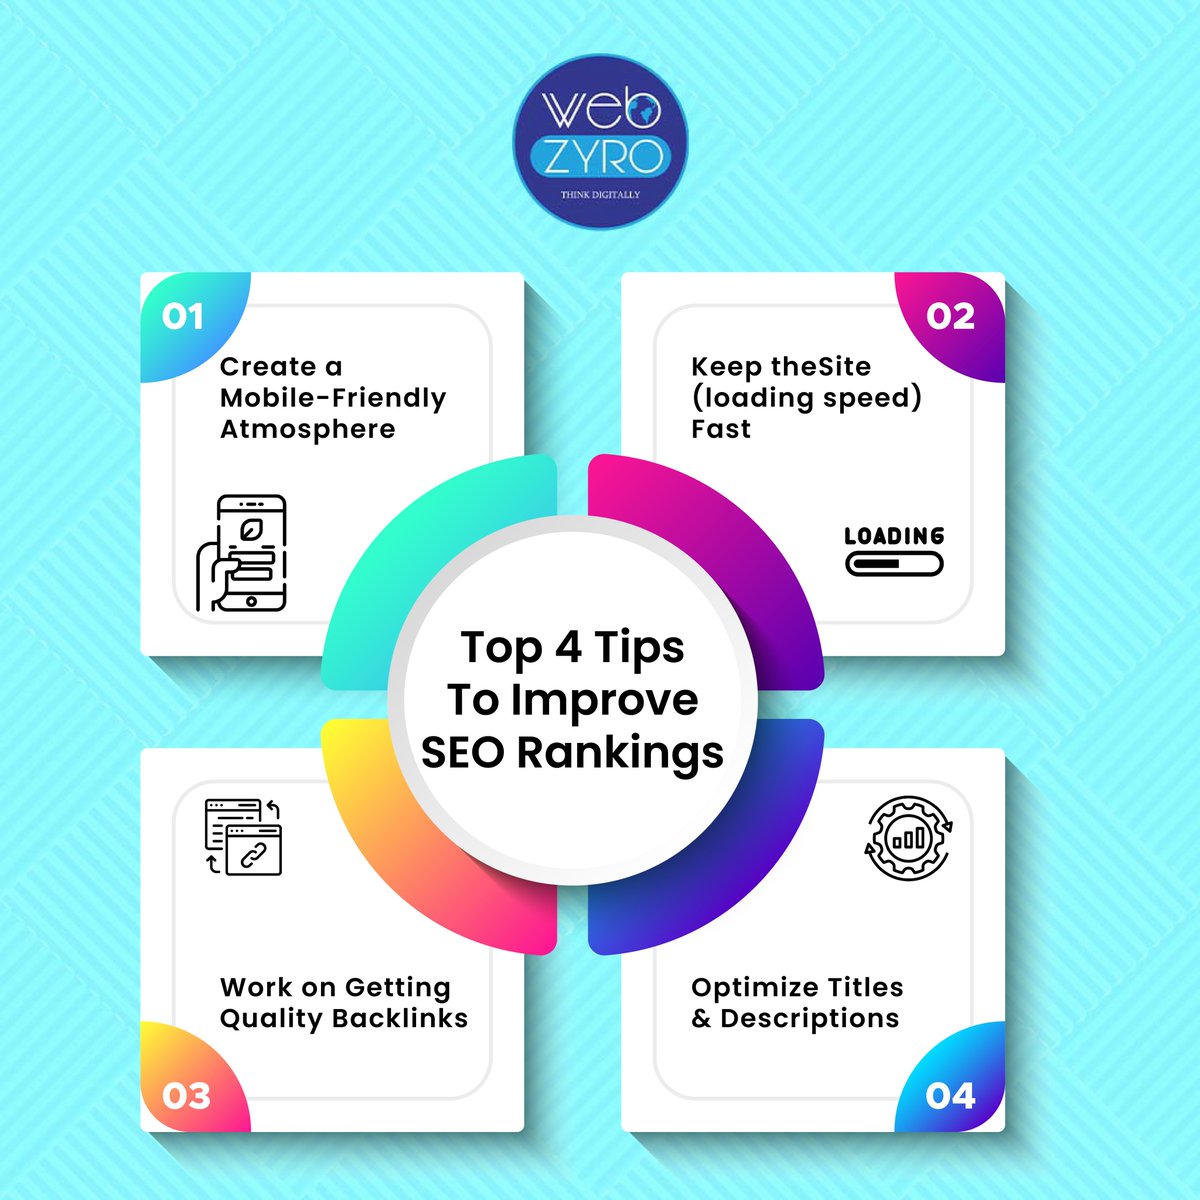 If your business isn't ranking high in search engine results, you're missing out on potential customers! SEO ranking is an important part of any business's online presence, and should not be overlooked. Make sure you are rising to the top of the rankings!

#SEO #seoranking